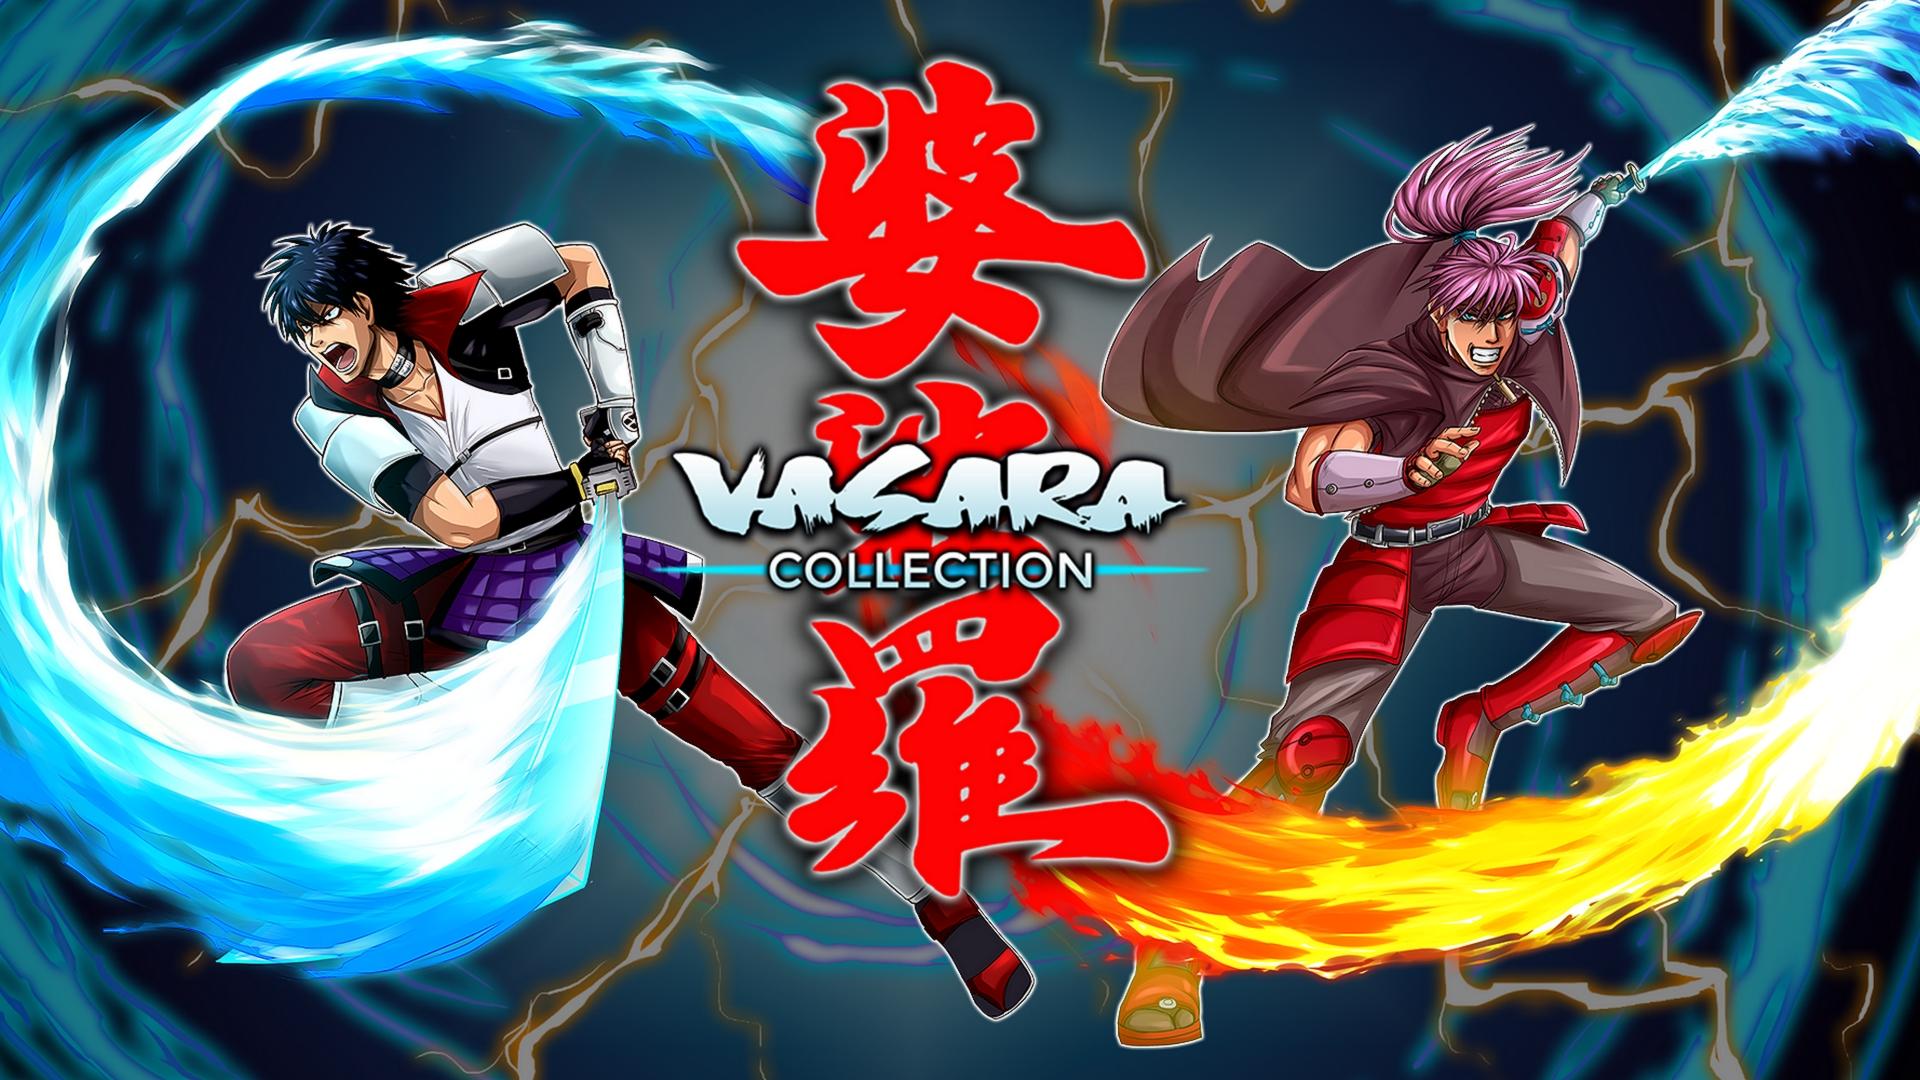 Vasara Collection for Nintendo Switch for $0.99